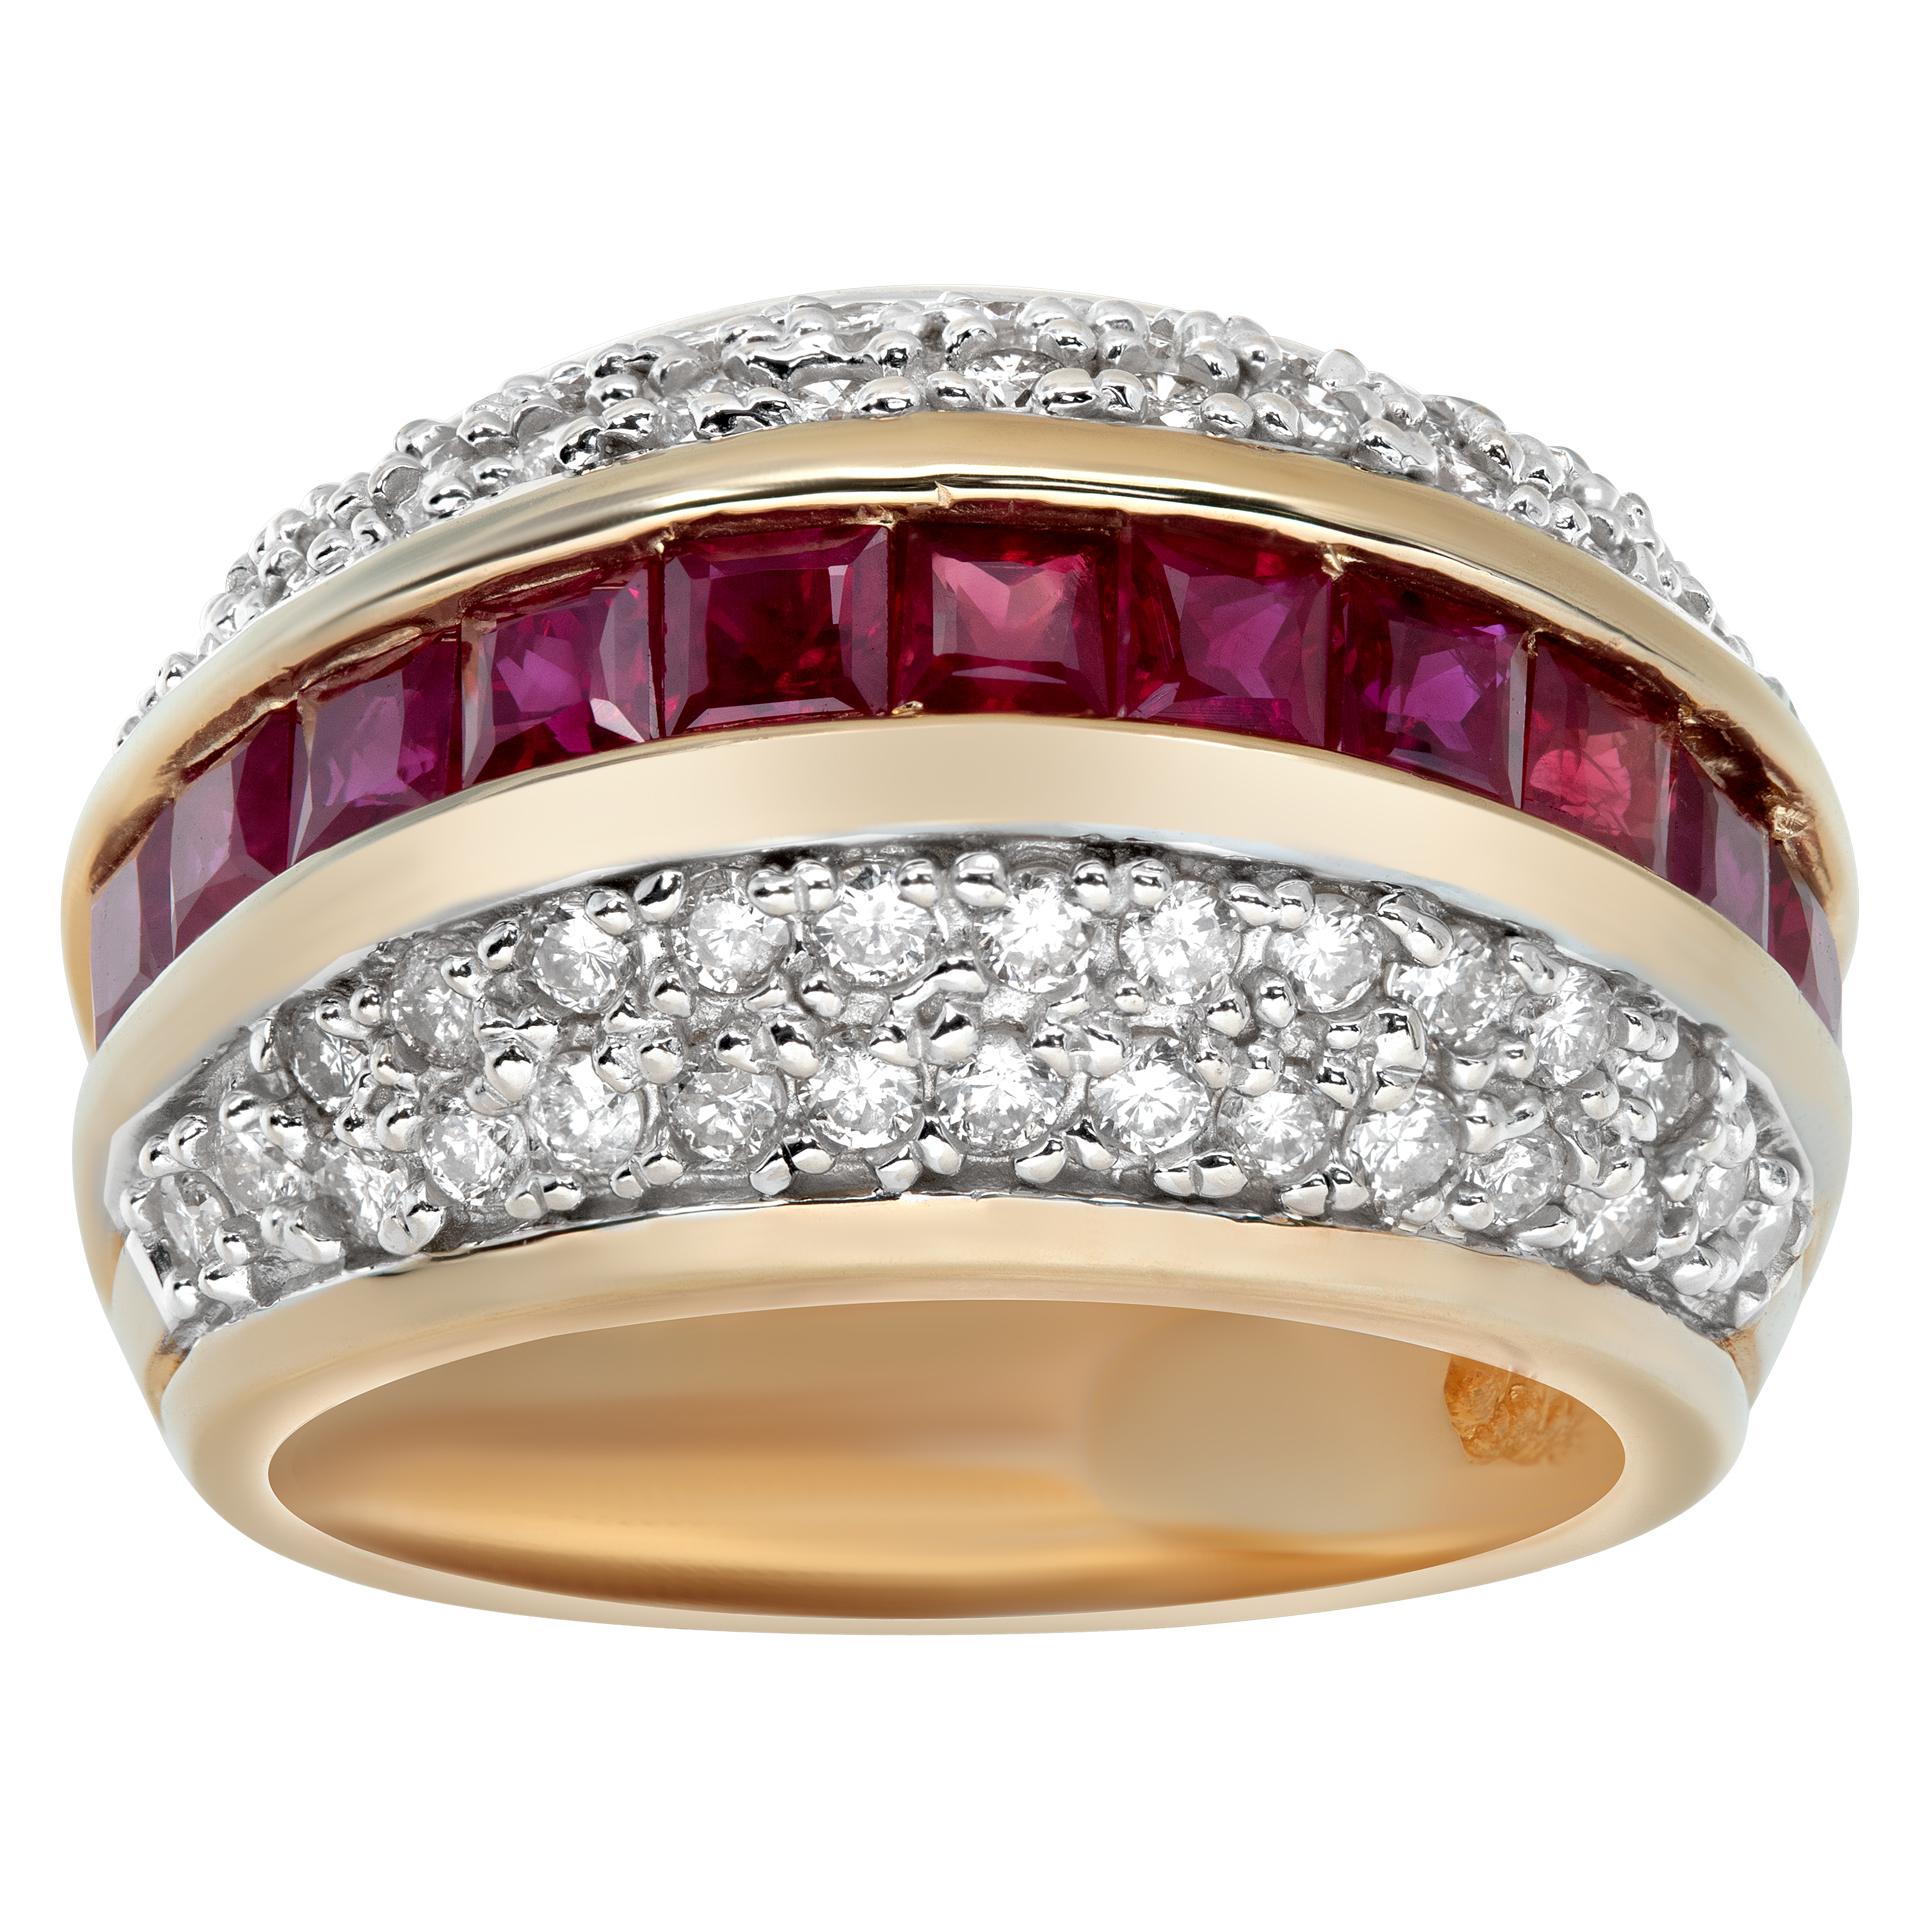 Cuad-row diamond ring with channel set rubies in 14k yellow gold. Approx 0.60 cts of diamonds and 1.20 cts of rubies. Size 5.75.This Diamond/Ruby ring is currently size 5.75 and some items can be sized up or down, please ask! It weighs 7.4